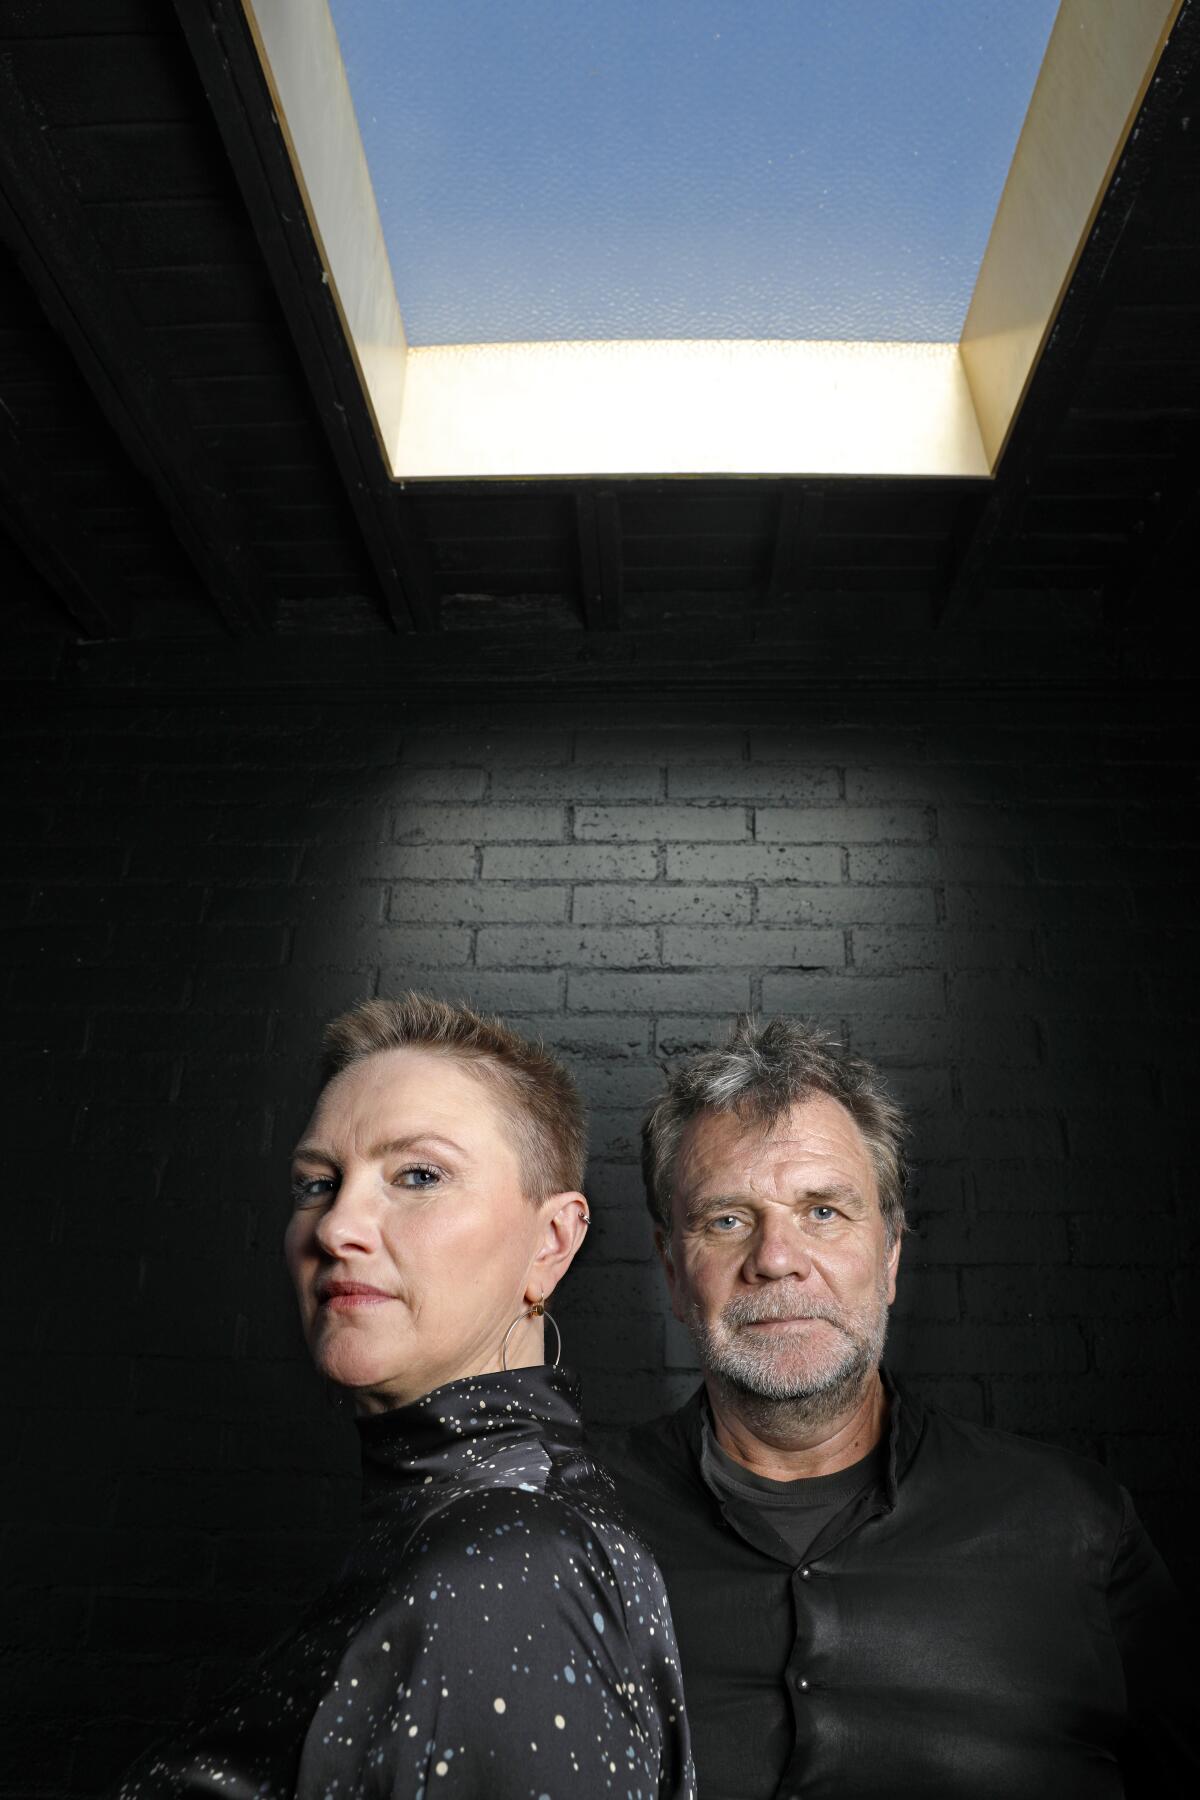 A woman and man stand together beneath a skylight.